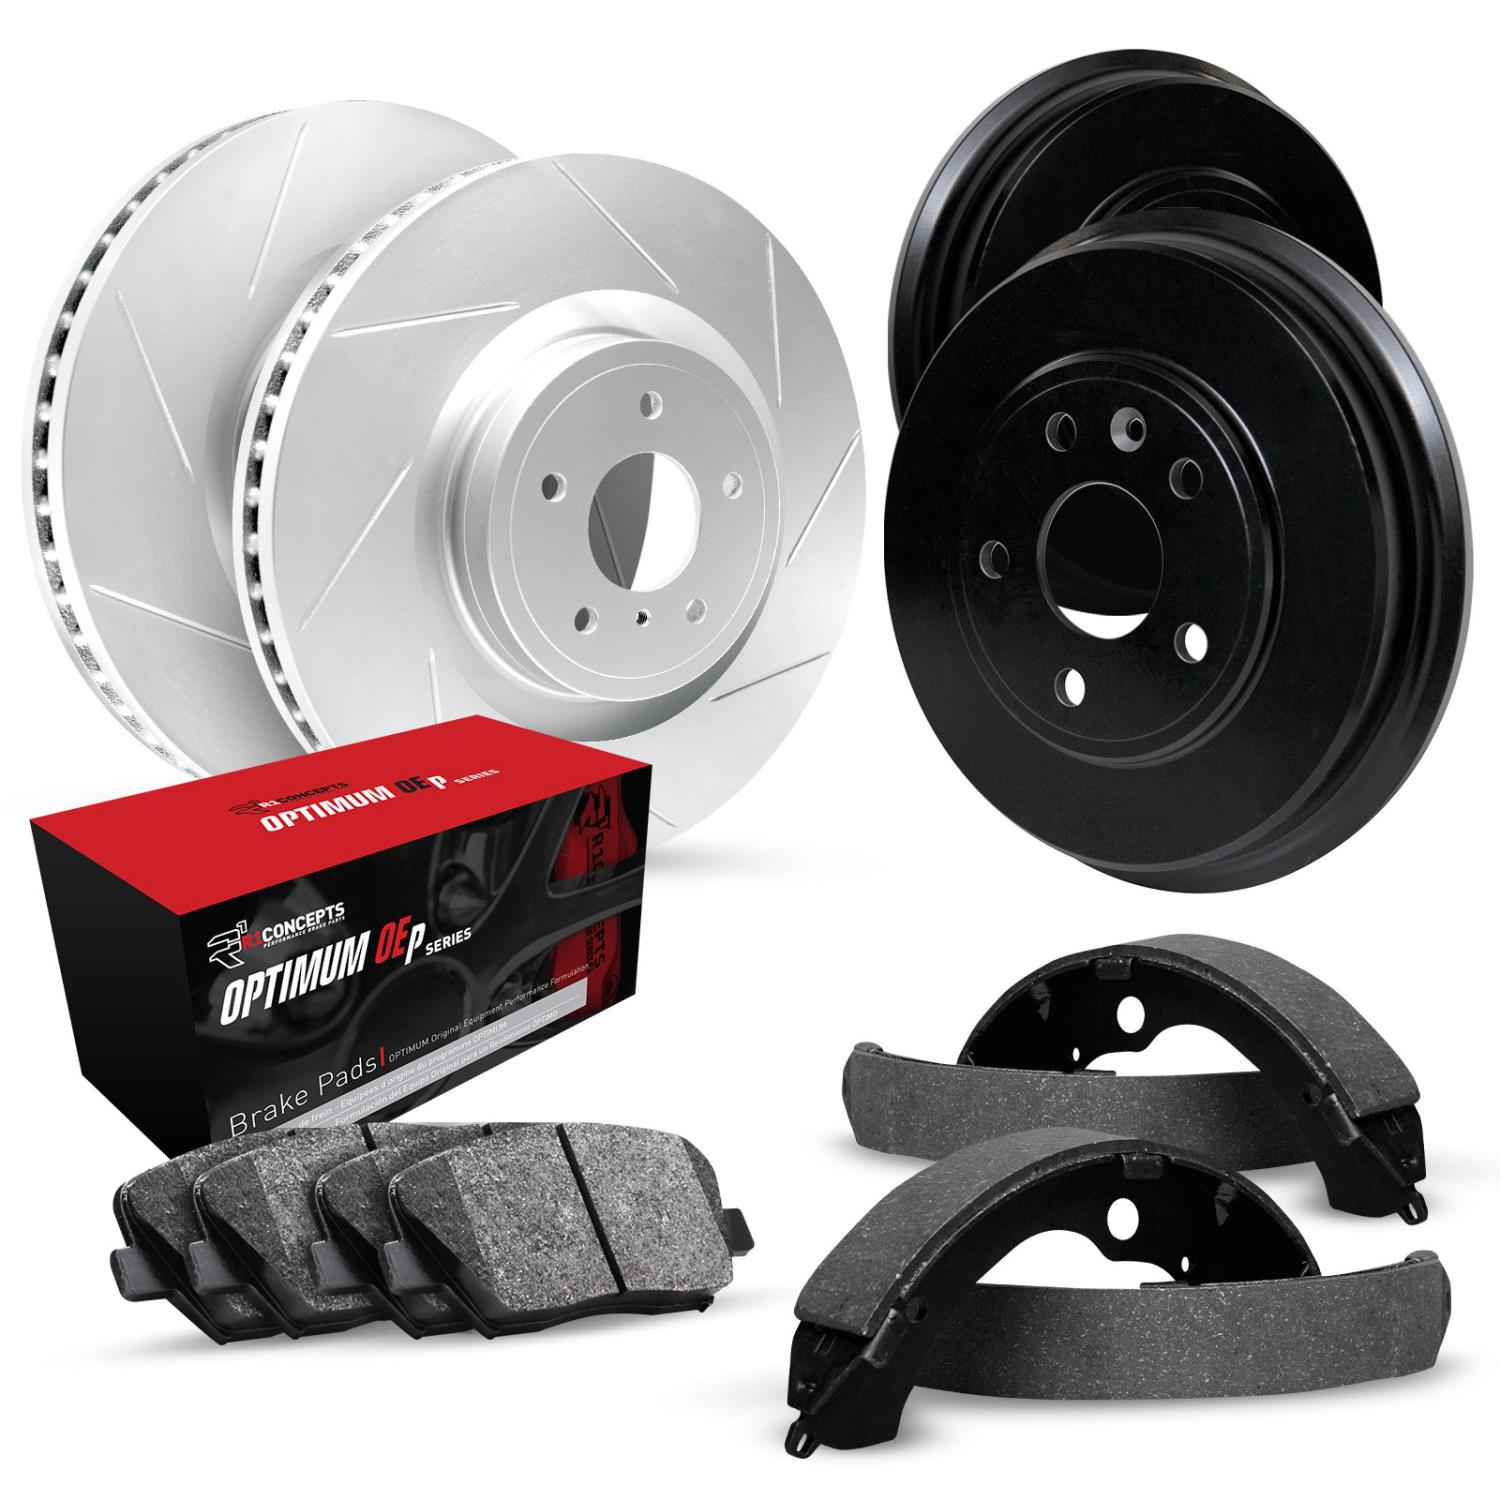 GEO-Carbon Slotted Brake Rotor & Drum Set w/Optimum OE Pads & Shoes, 2002-2005 Mitsubishi, Position: Front & Rear